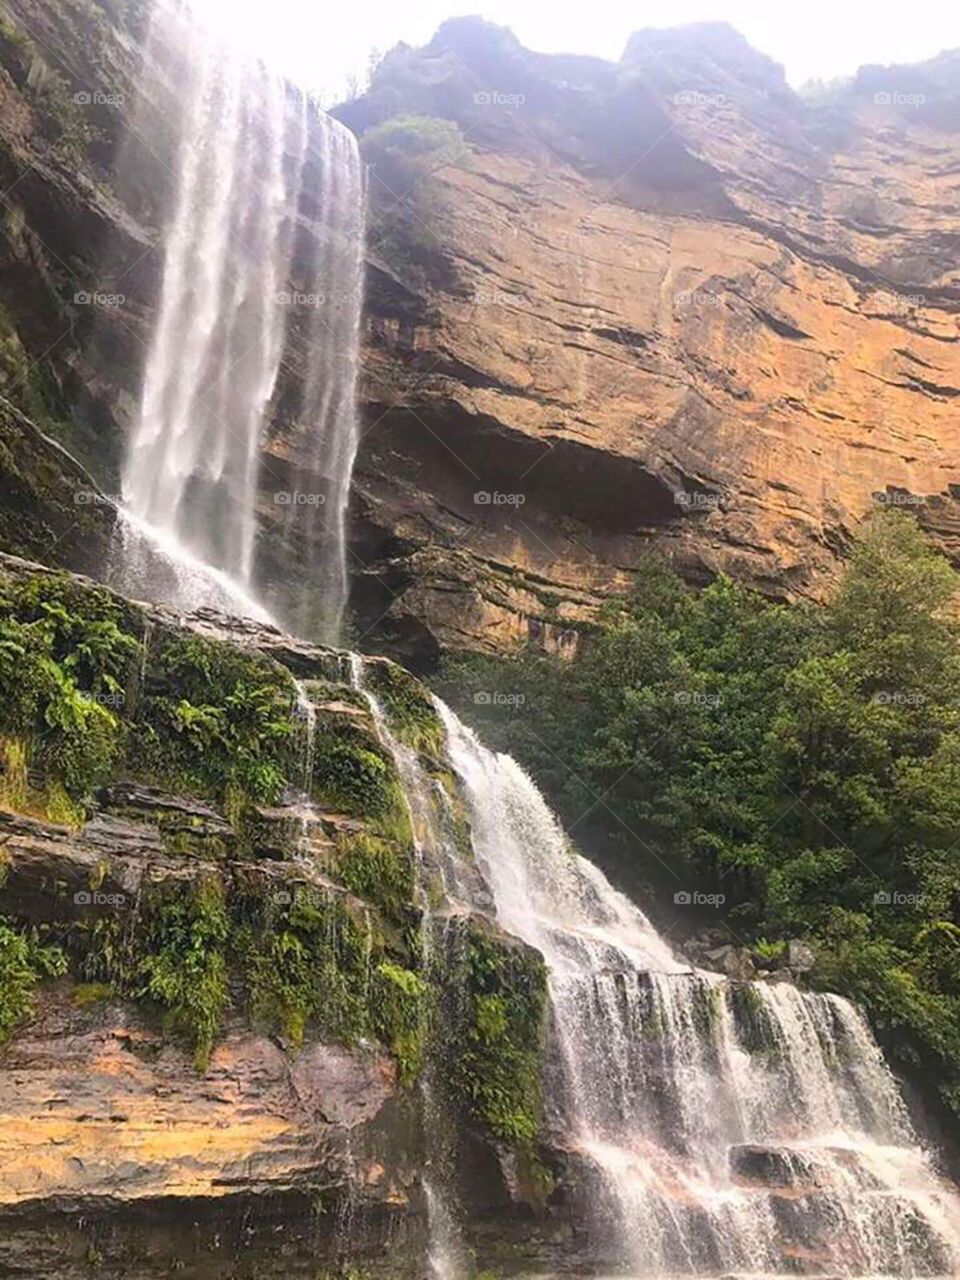 Falling in Blue Mountains national Park

📍Australia.